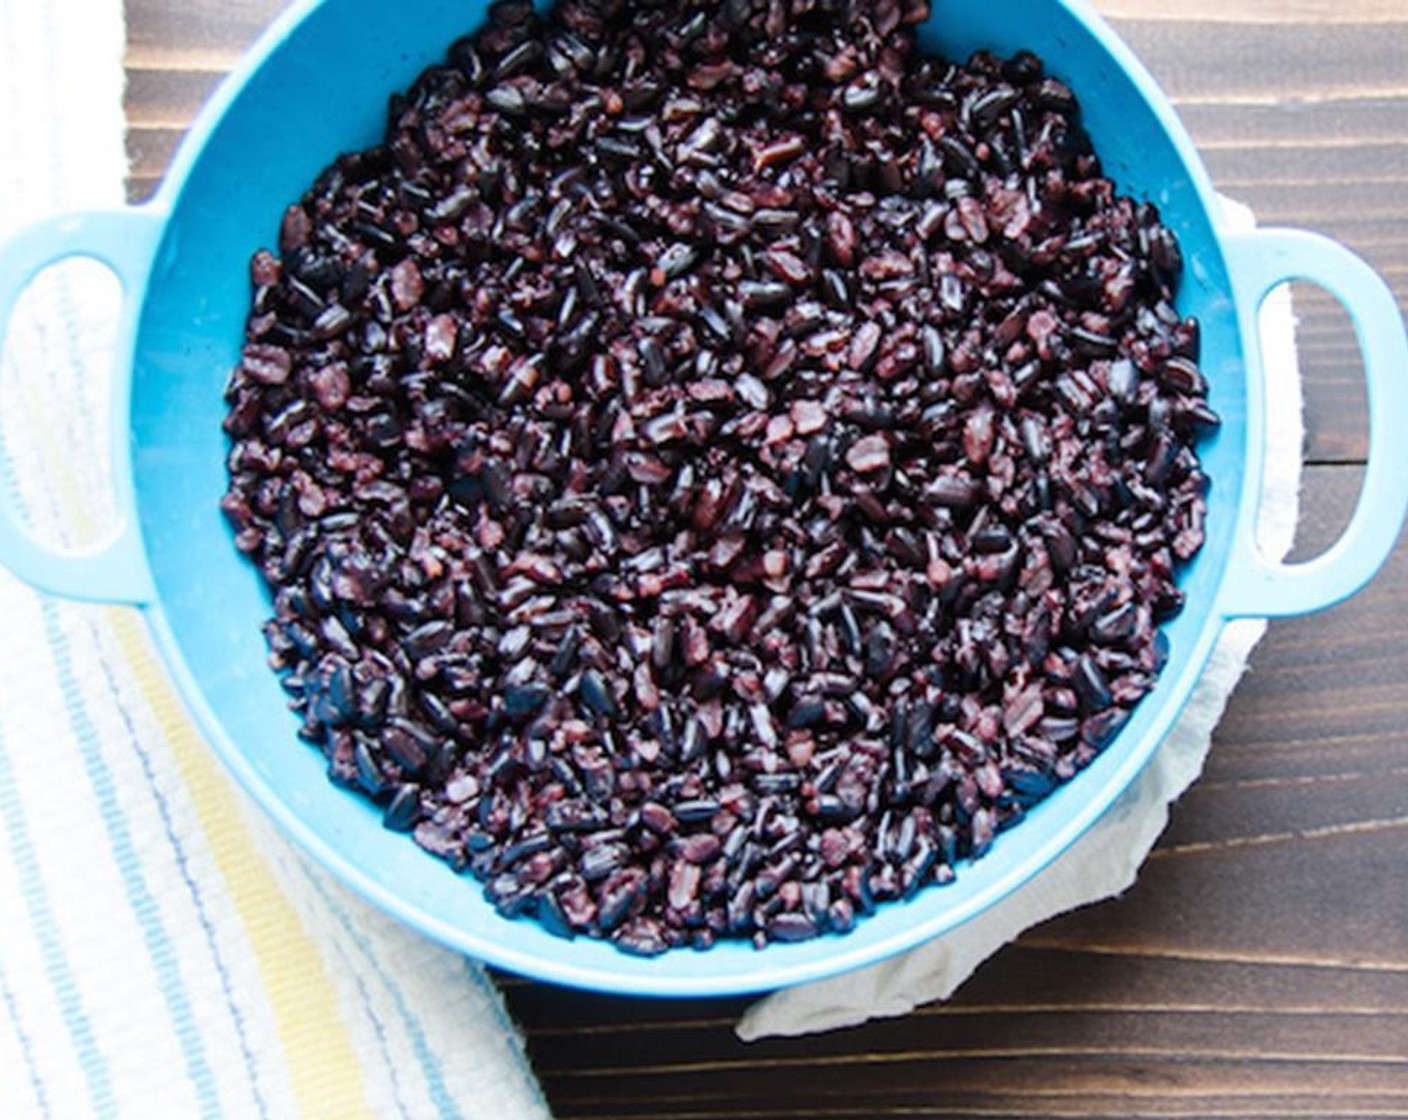 step 1 Place the cooked Black Rice (2 1/2 Tbsp) into a bowl and set aside.